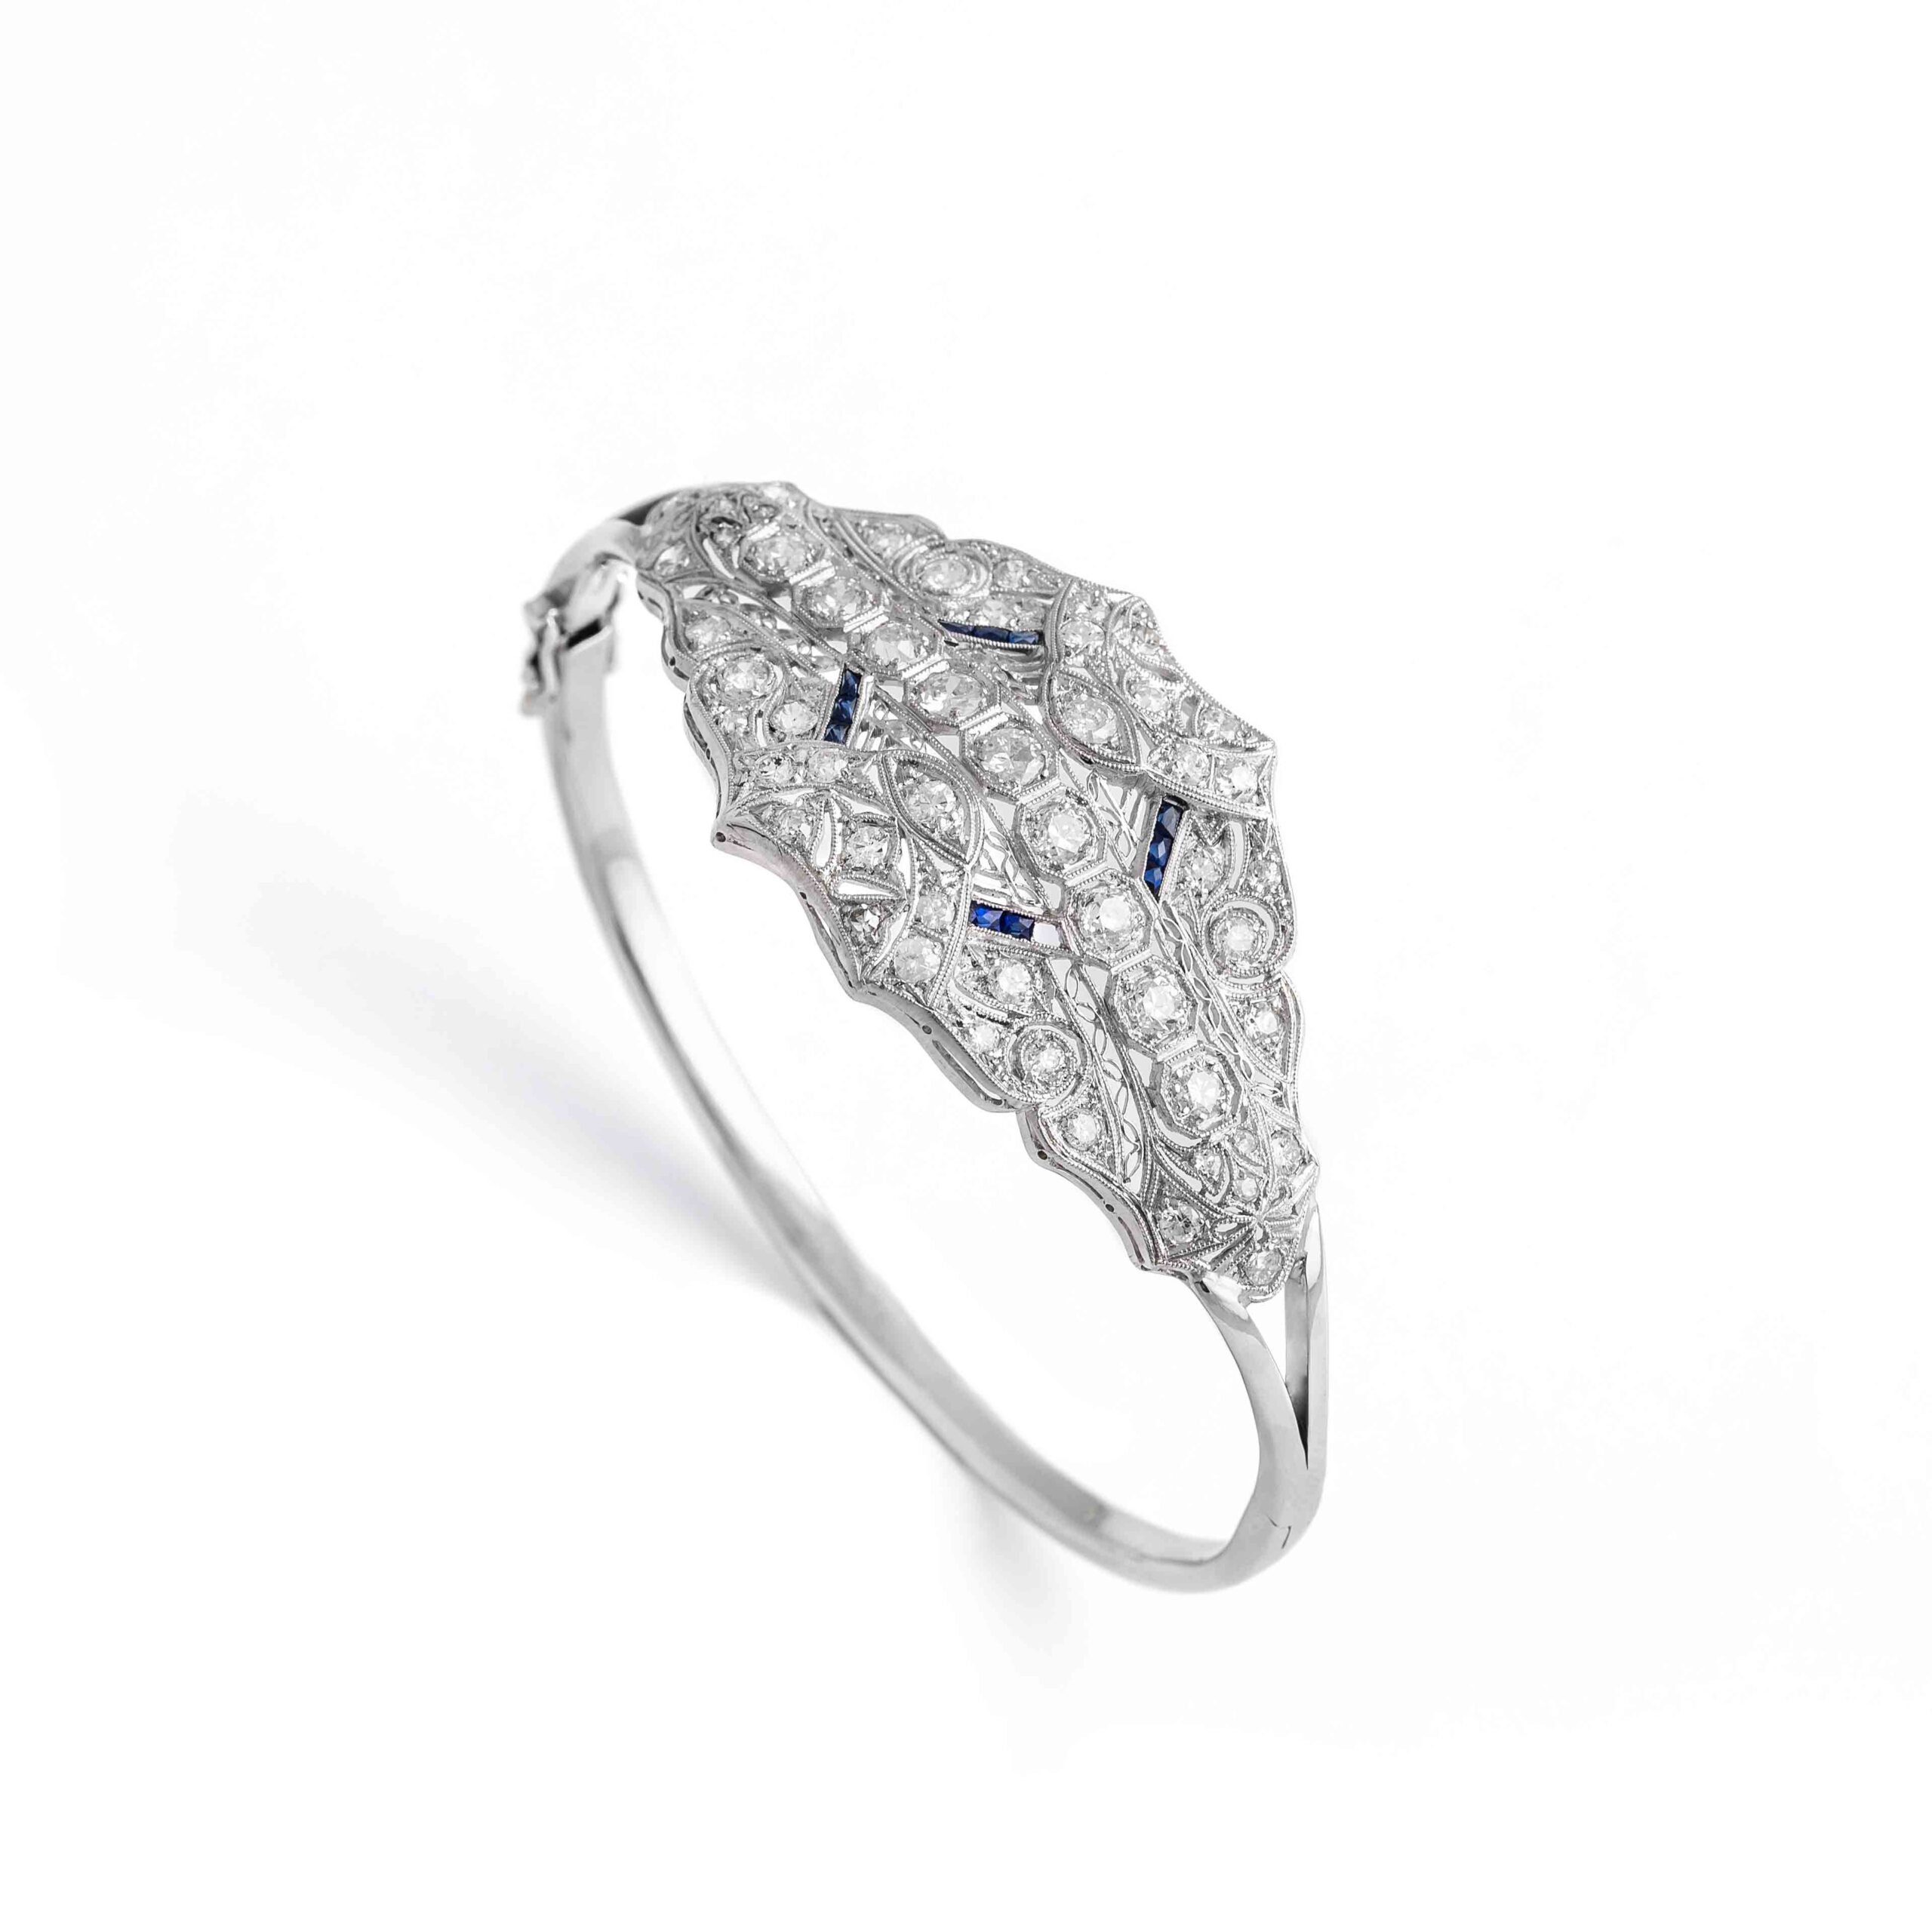 Old mine cut Diamond and calibrated Sapphire on Platinum and 14K White Gold Bangle. One sapphire missing. Top part dimensions: 5.50 centimeters x 3.00 centimeters. Wrist size: 18.00 centimeters.